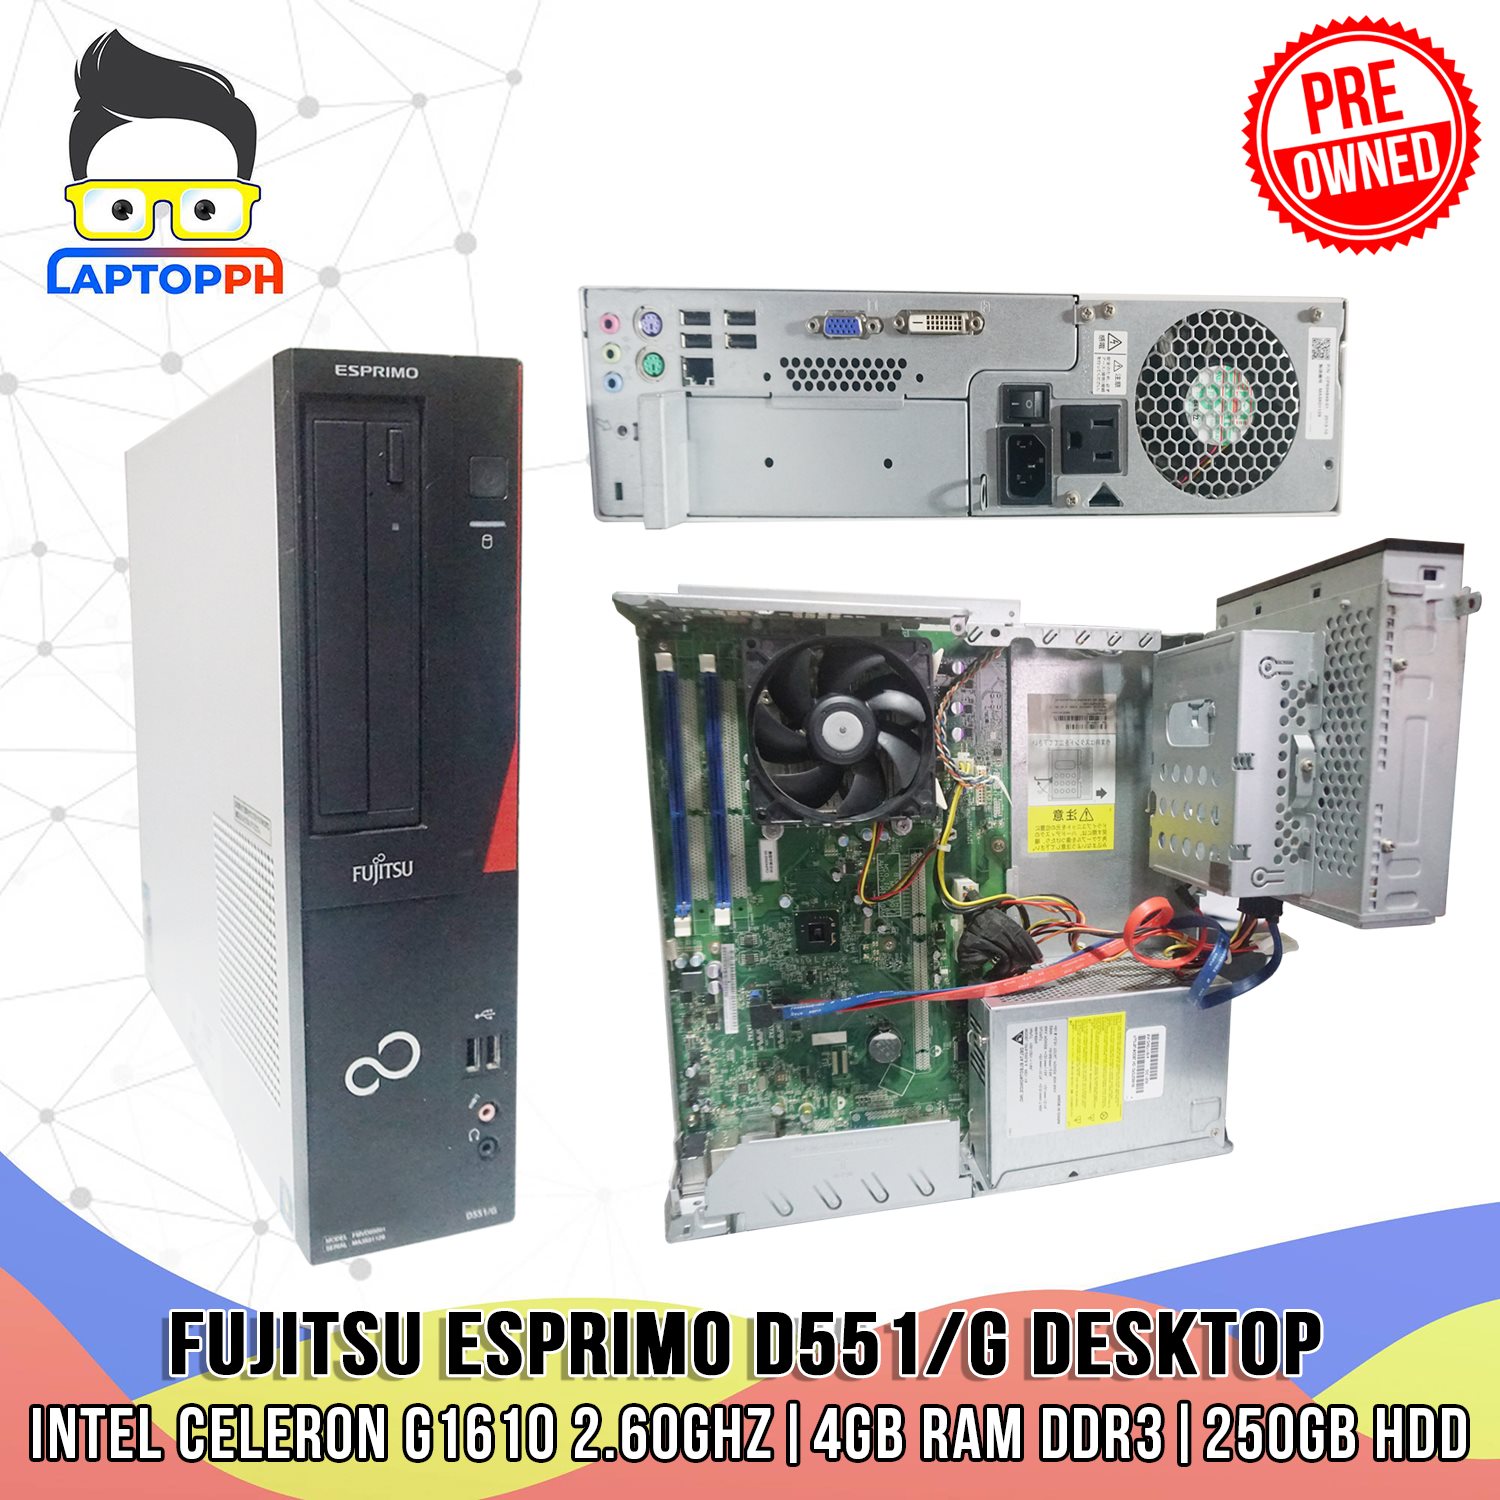 FUJITSU ESPRIMO D551/G SYSTEM UNIT ONLY | INTEL CELERON G1610 2.6GHZ | 4GB  DDR3 | 250GB HDD | We also have Epson, Toshiba, Nec, Hp, Dell, Lenovo,  Computer Package, Computer Set, Laptops |